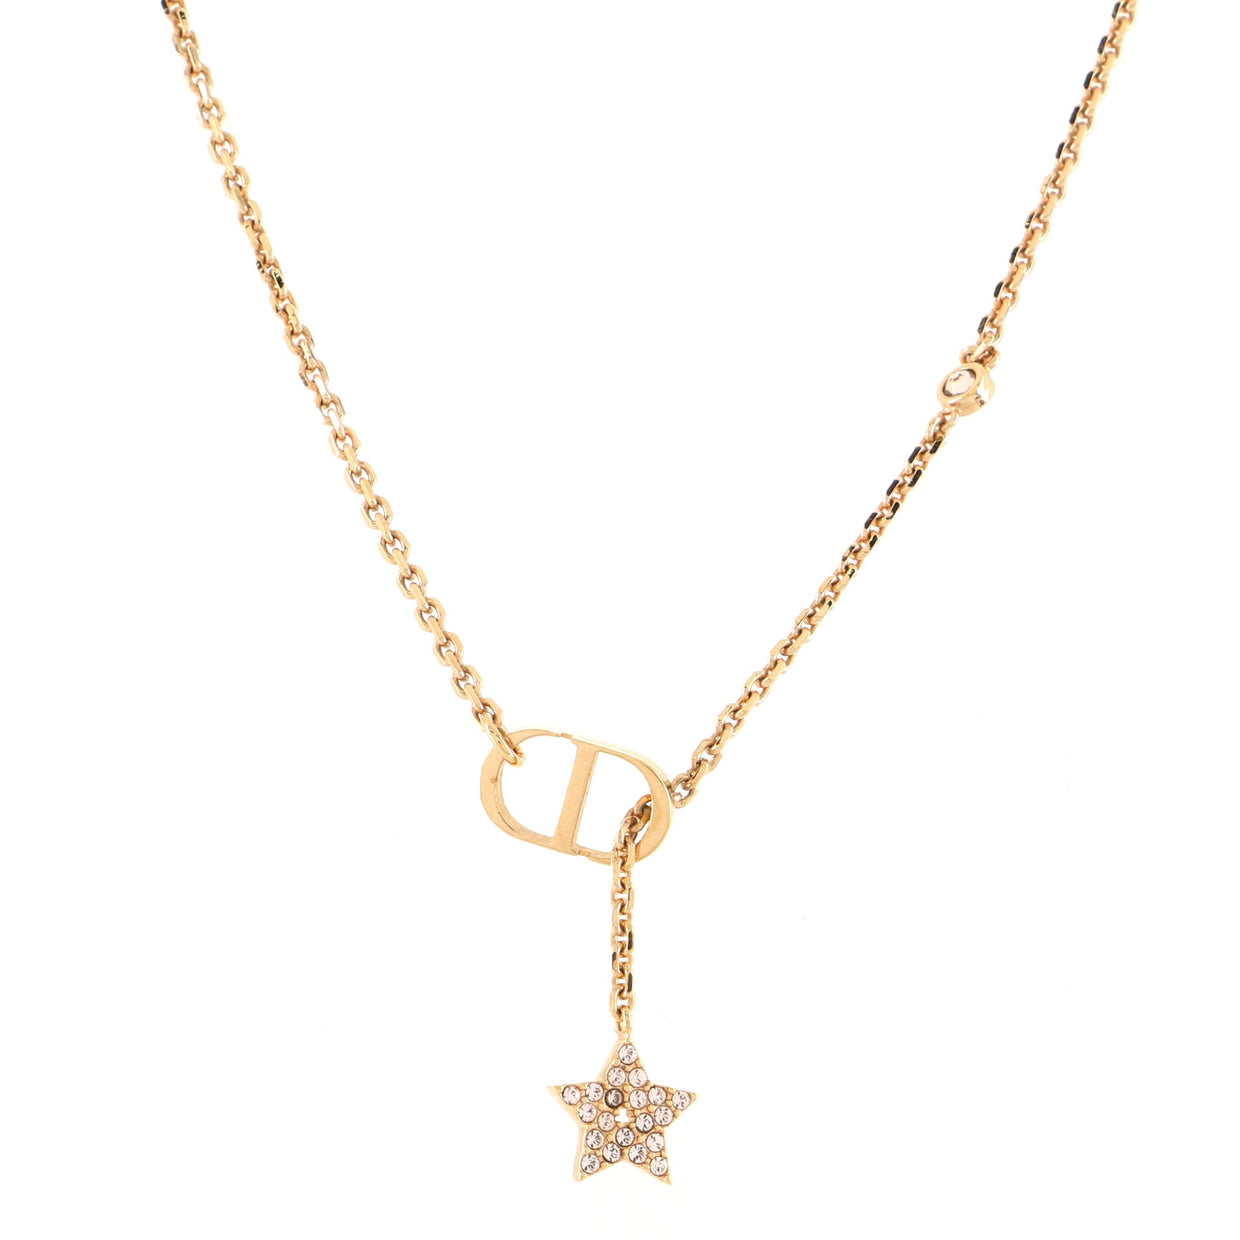 Christian Dior Petit CD Star Necklace Metal with Crystals Gold 7599610